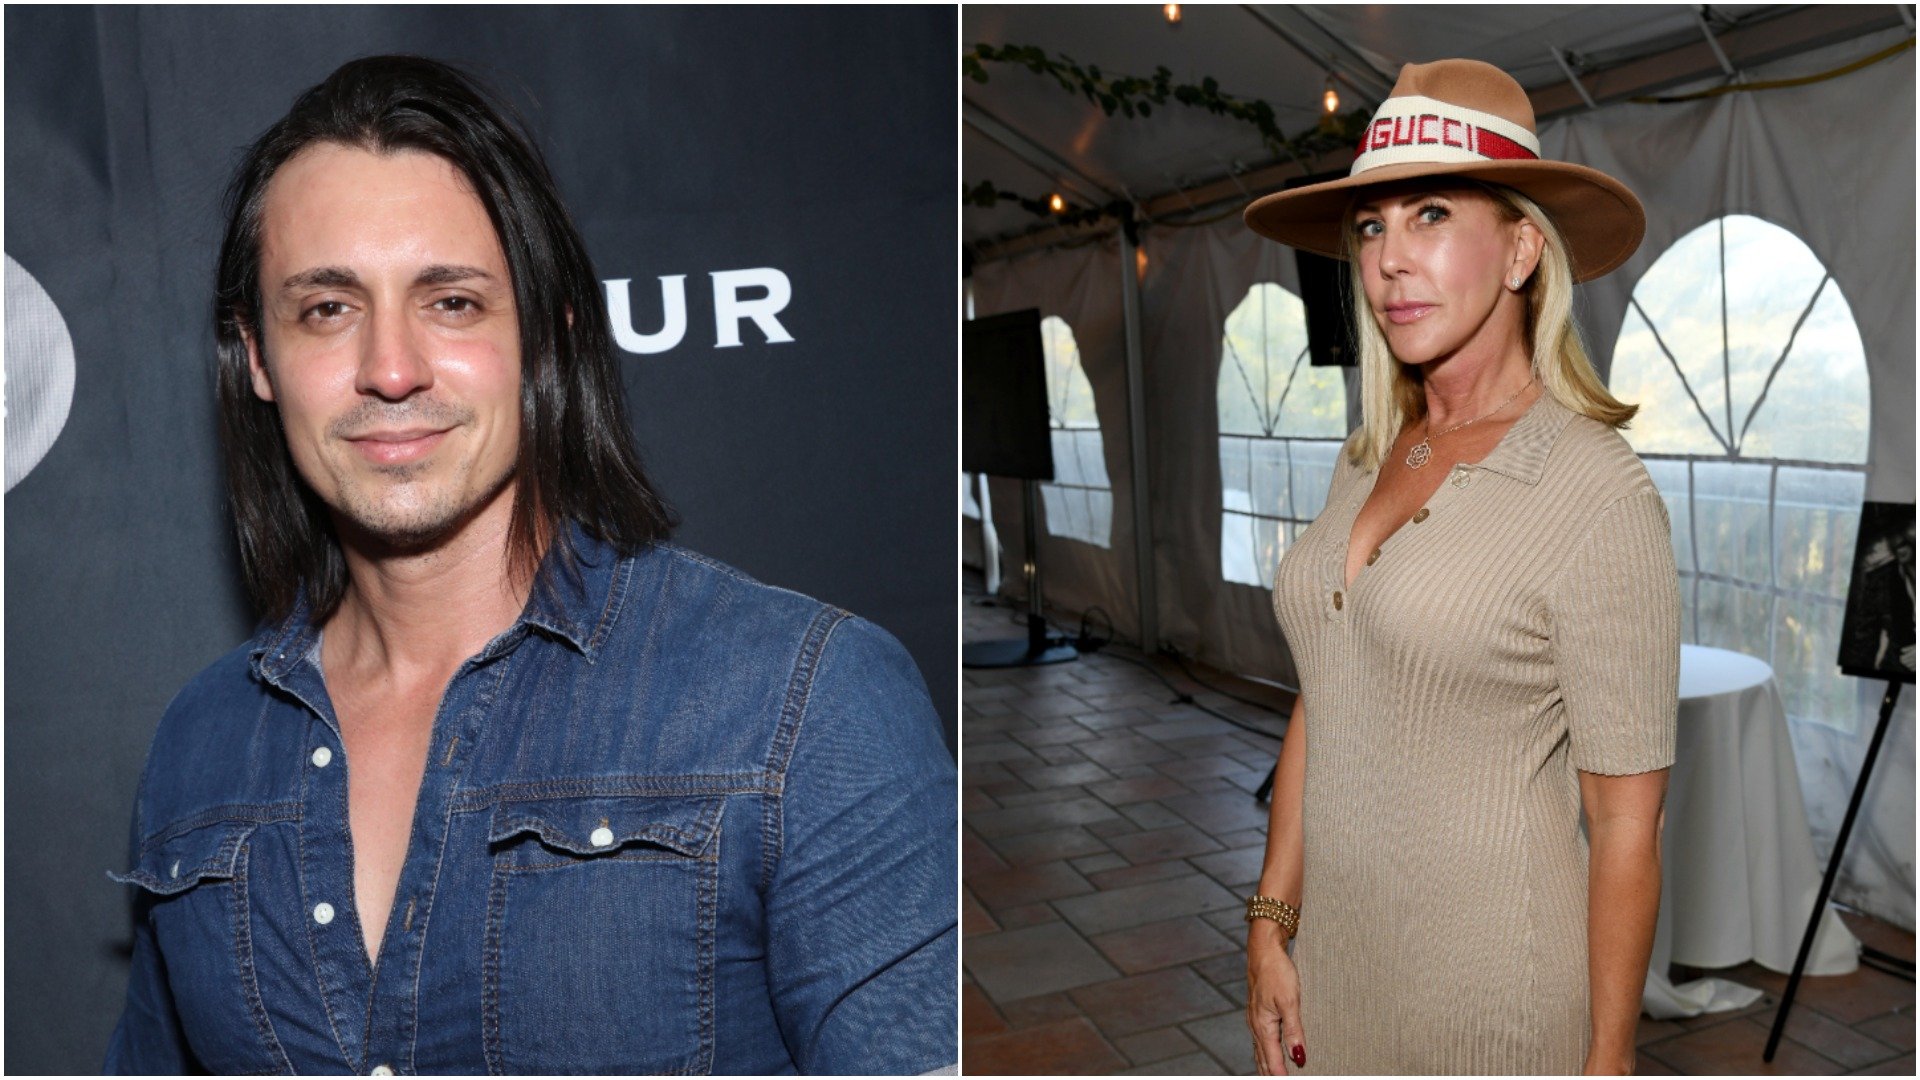 Peter Madrigal from 'Vanderpump Rules' and Vicki Gunvalson from 'RHOC' had an exchange on Twitter. 